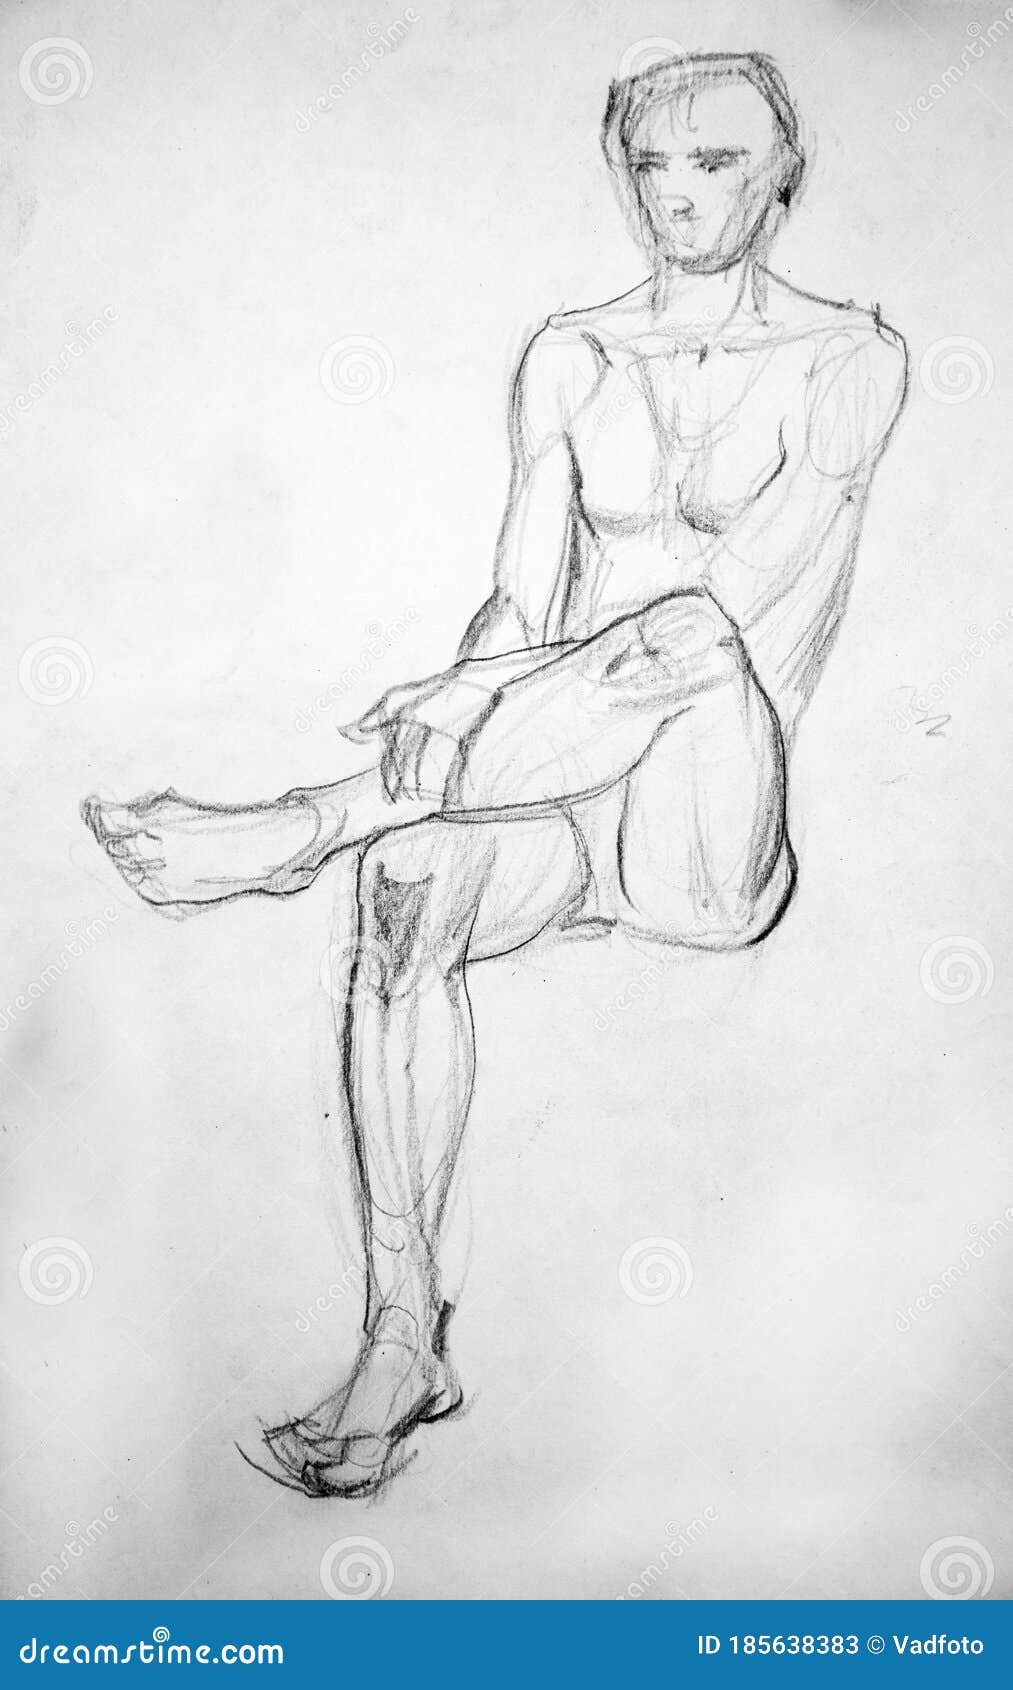 Pranit  Pencil Sketch Human Figure Study Camera Perspective Image  Distortion Linear style suggestive rendering  Facebook